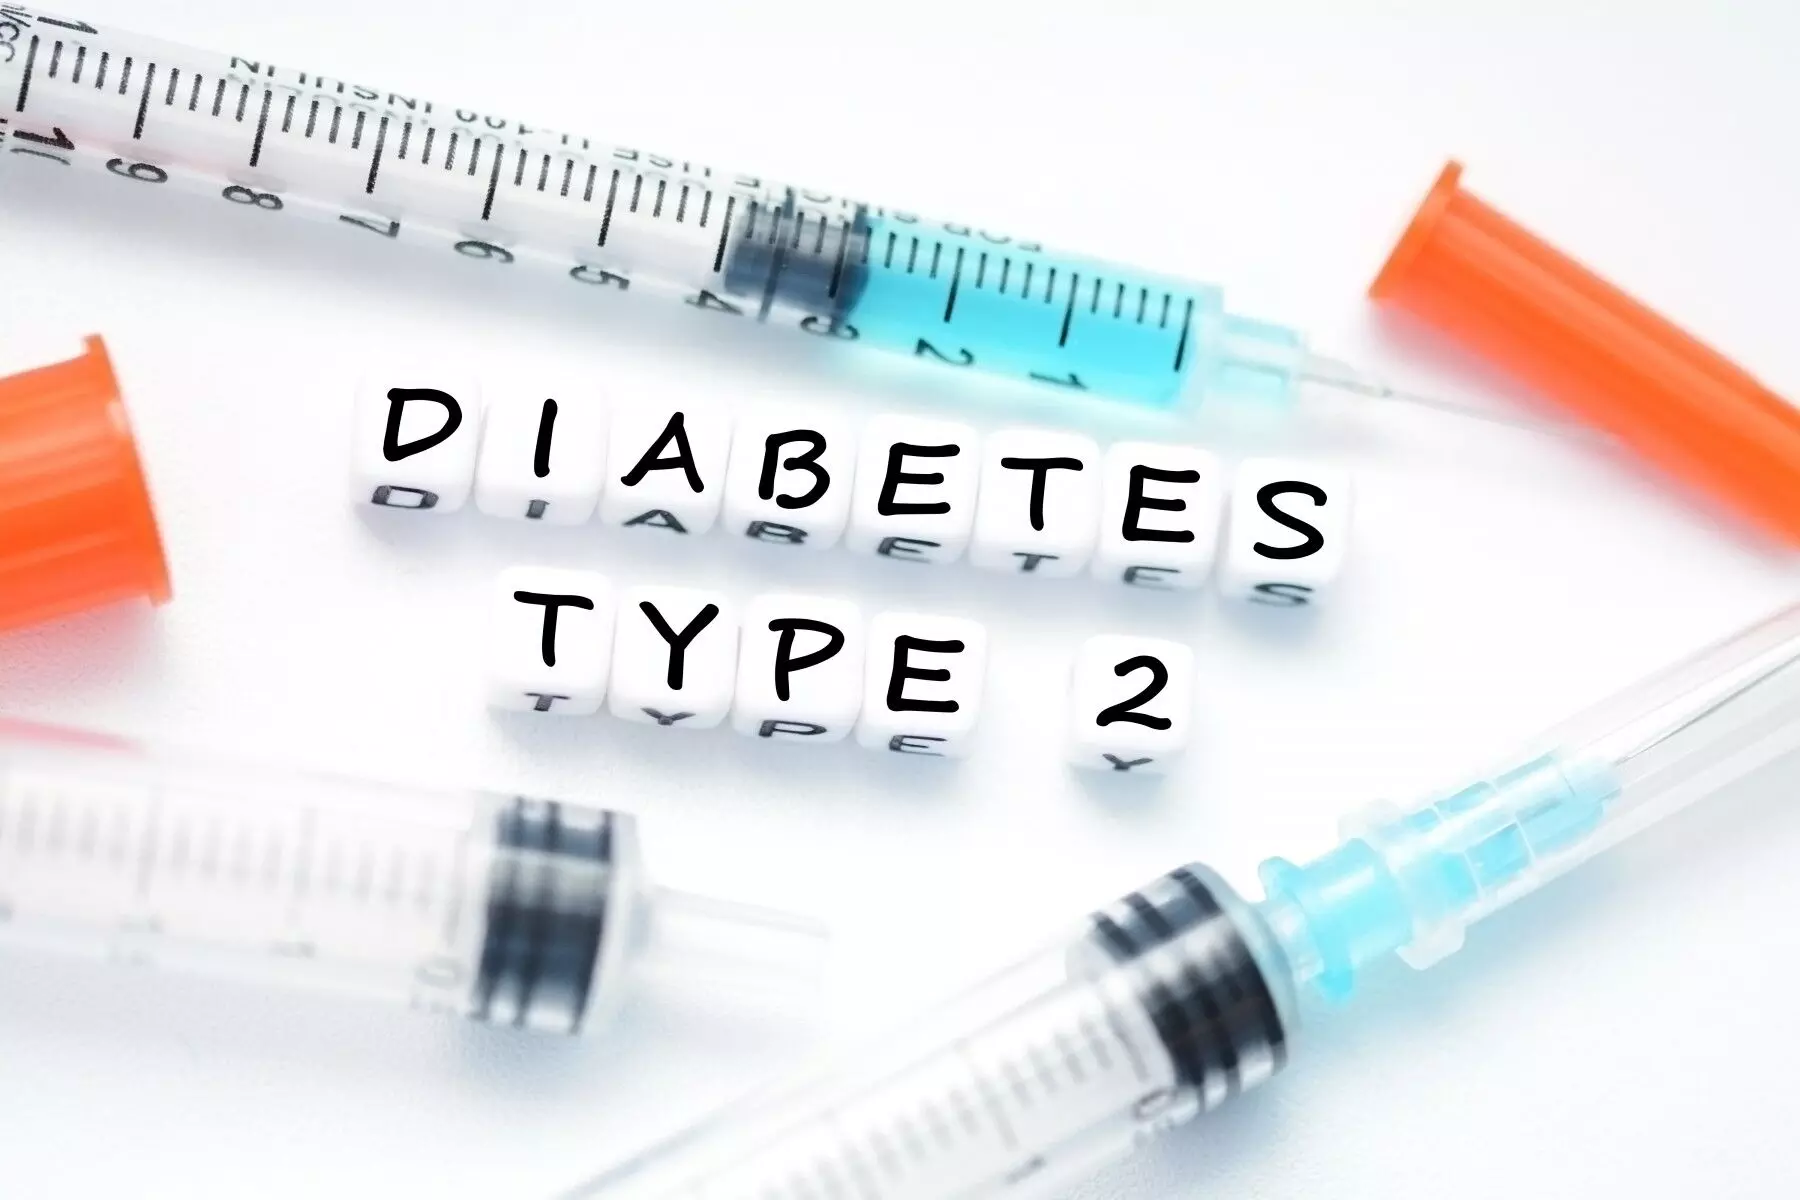 Novel Fixed Ratio Combination therapy promising for T2D patients, research shows